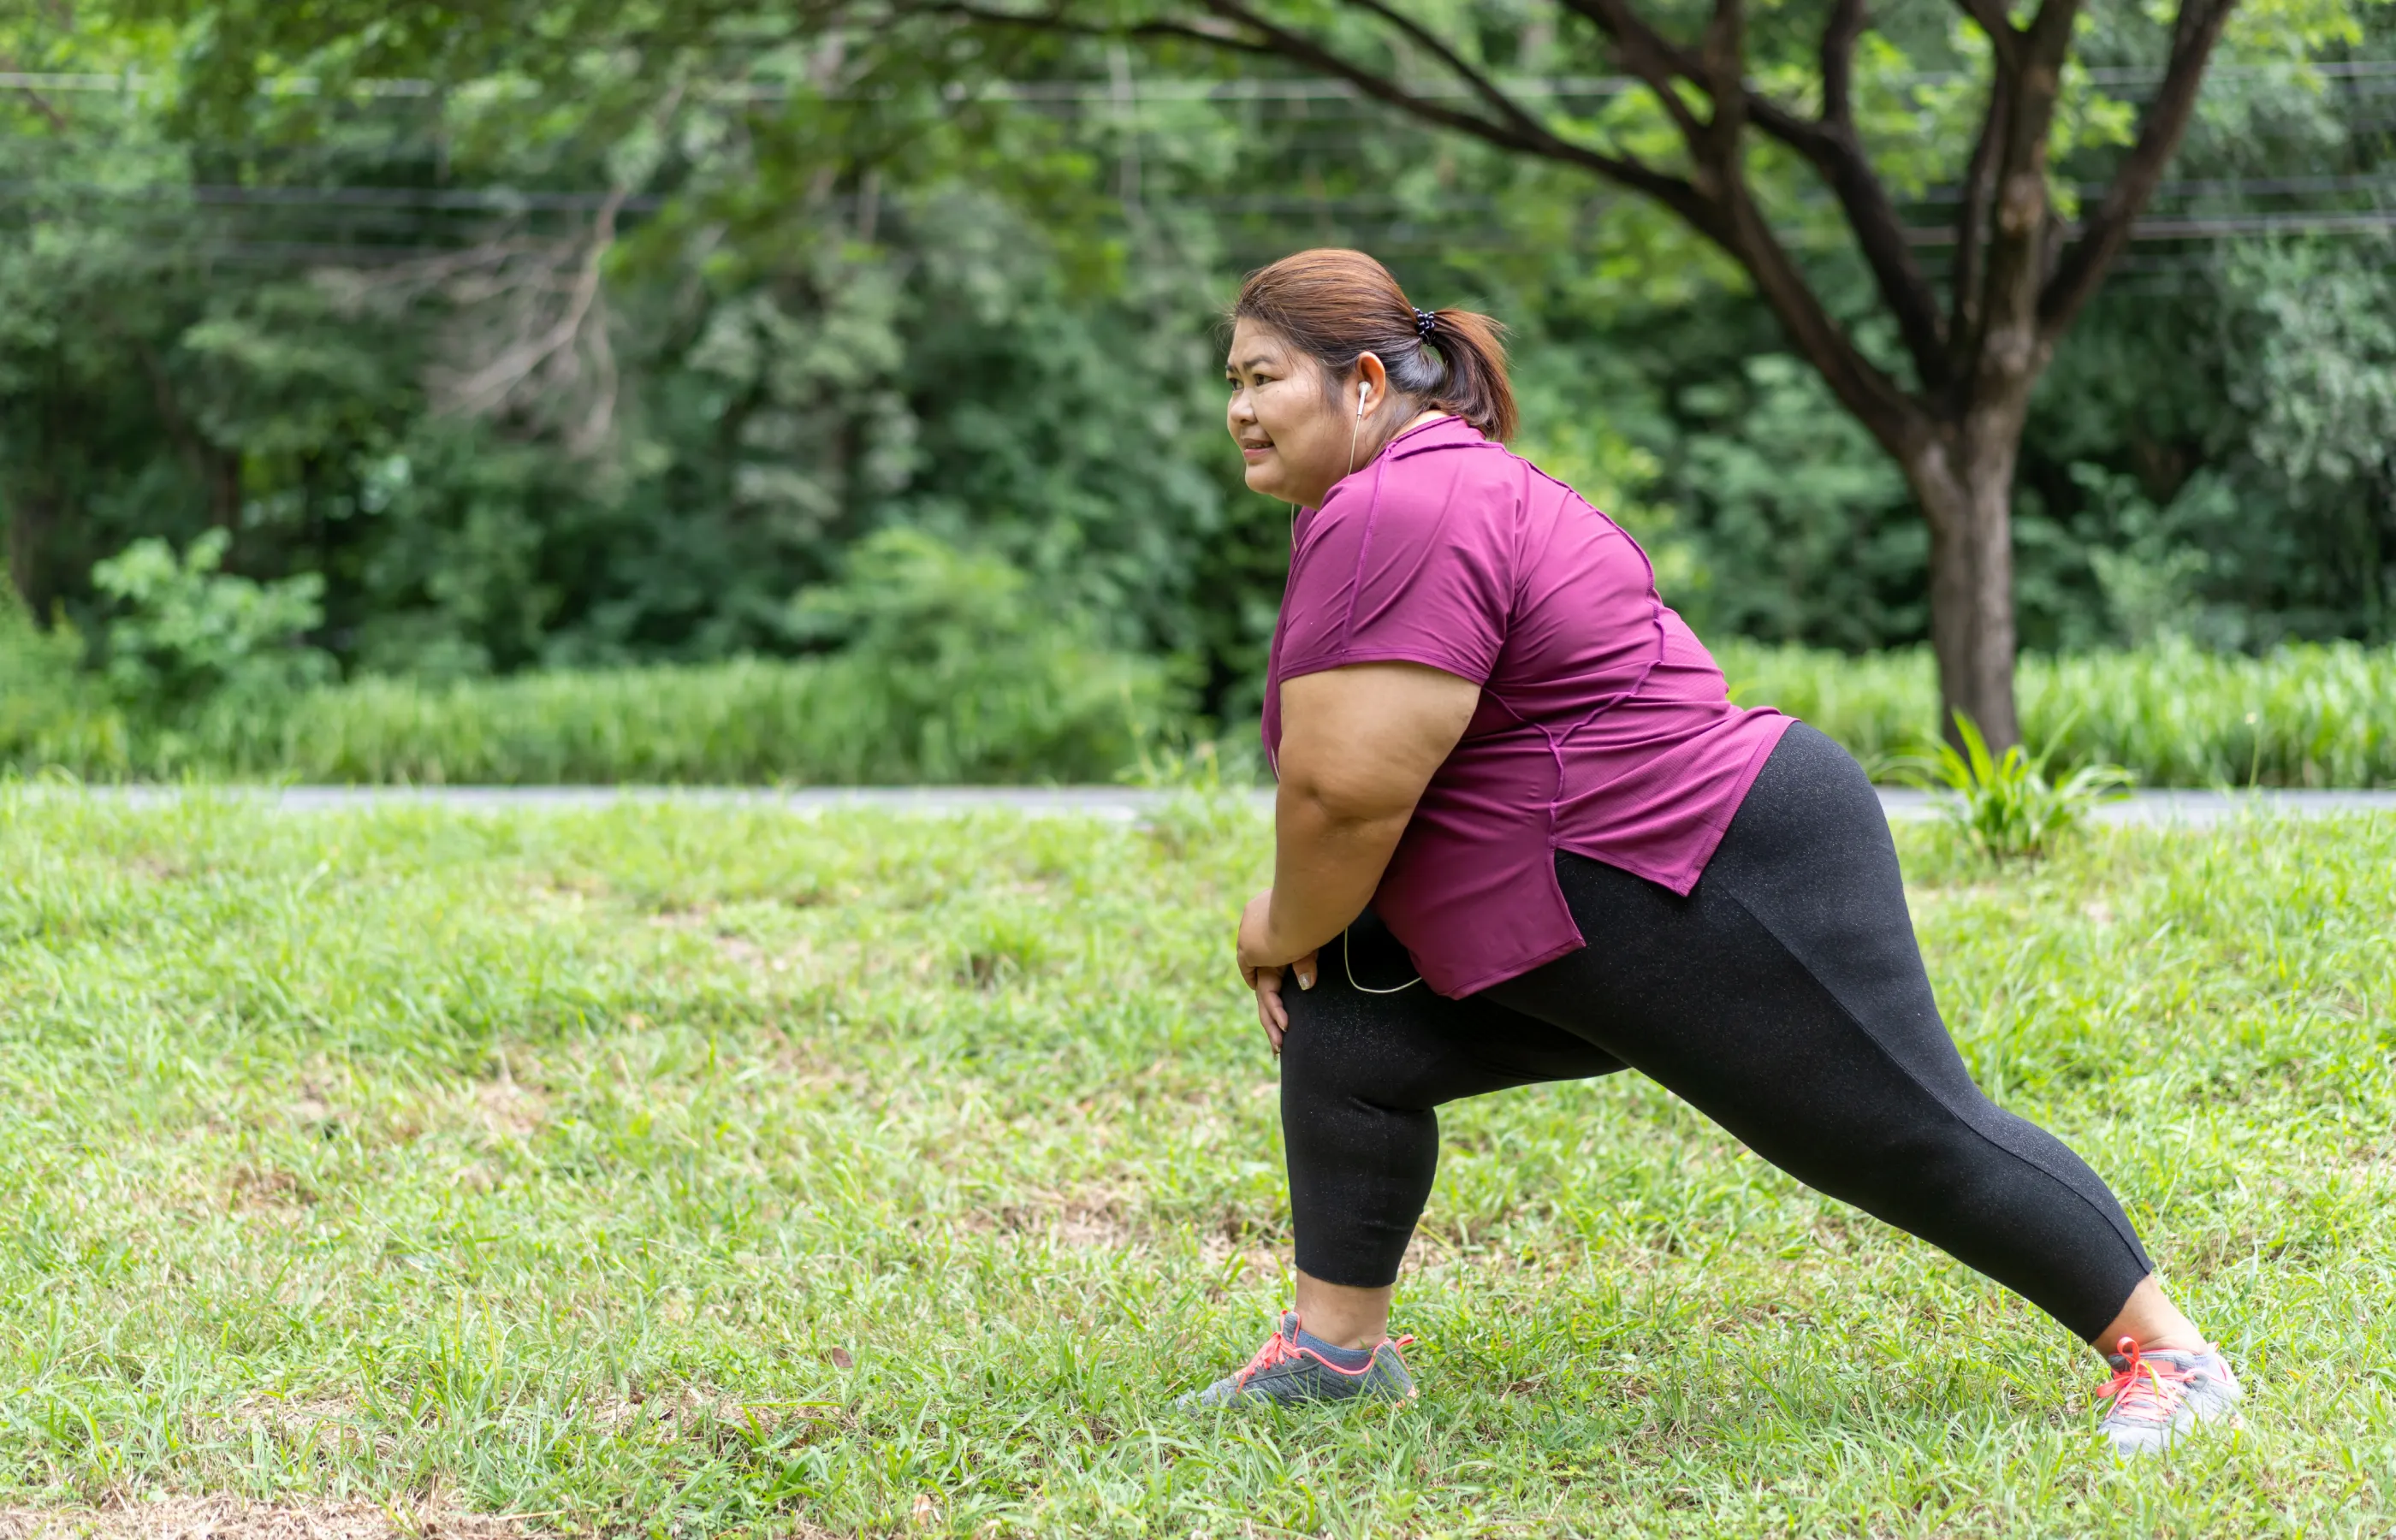 A woman is outdoors, stretching with headphones in her ear.